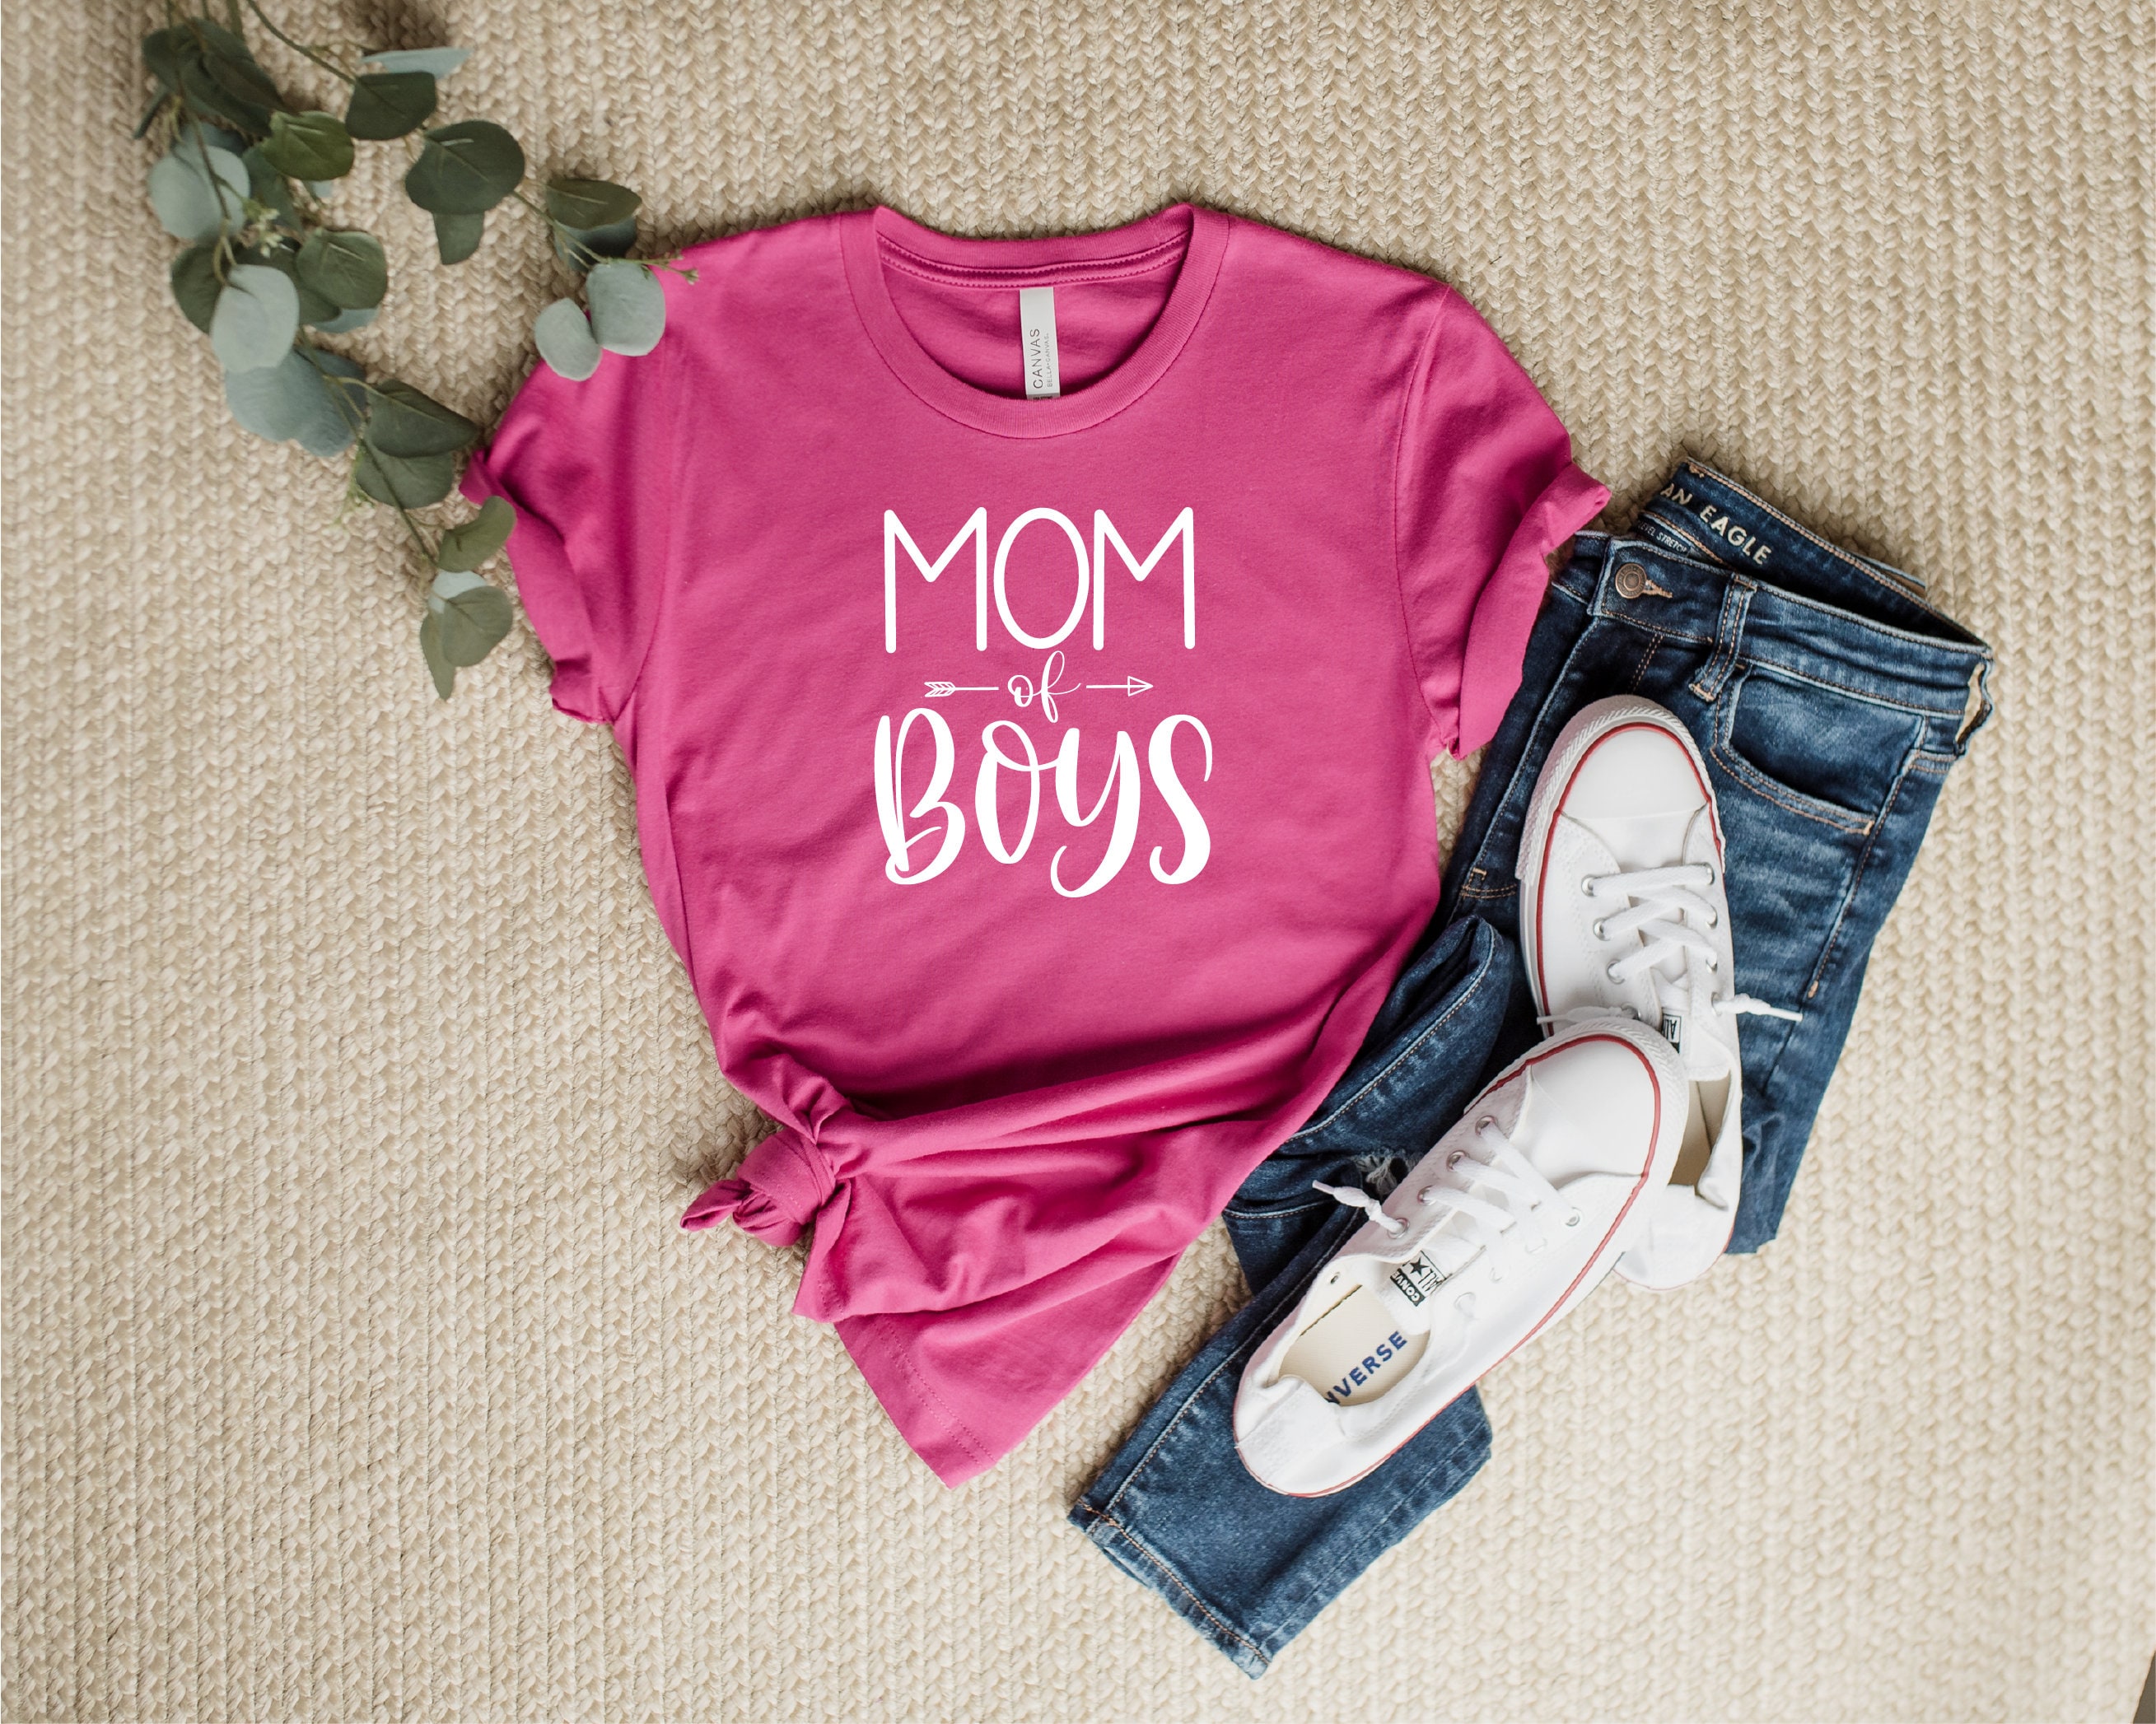 Mom of Boys T-shirt Boys Mom T-shirt Boys Mom Shirt Mother | Etsy